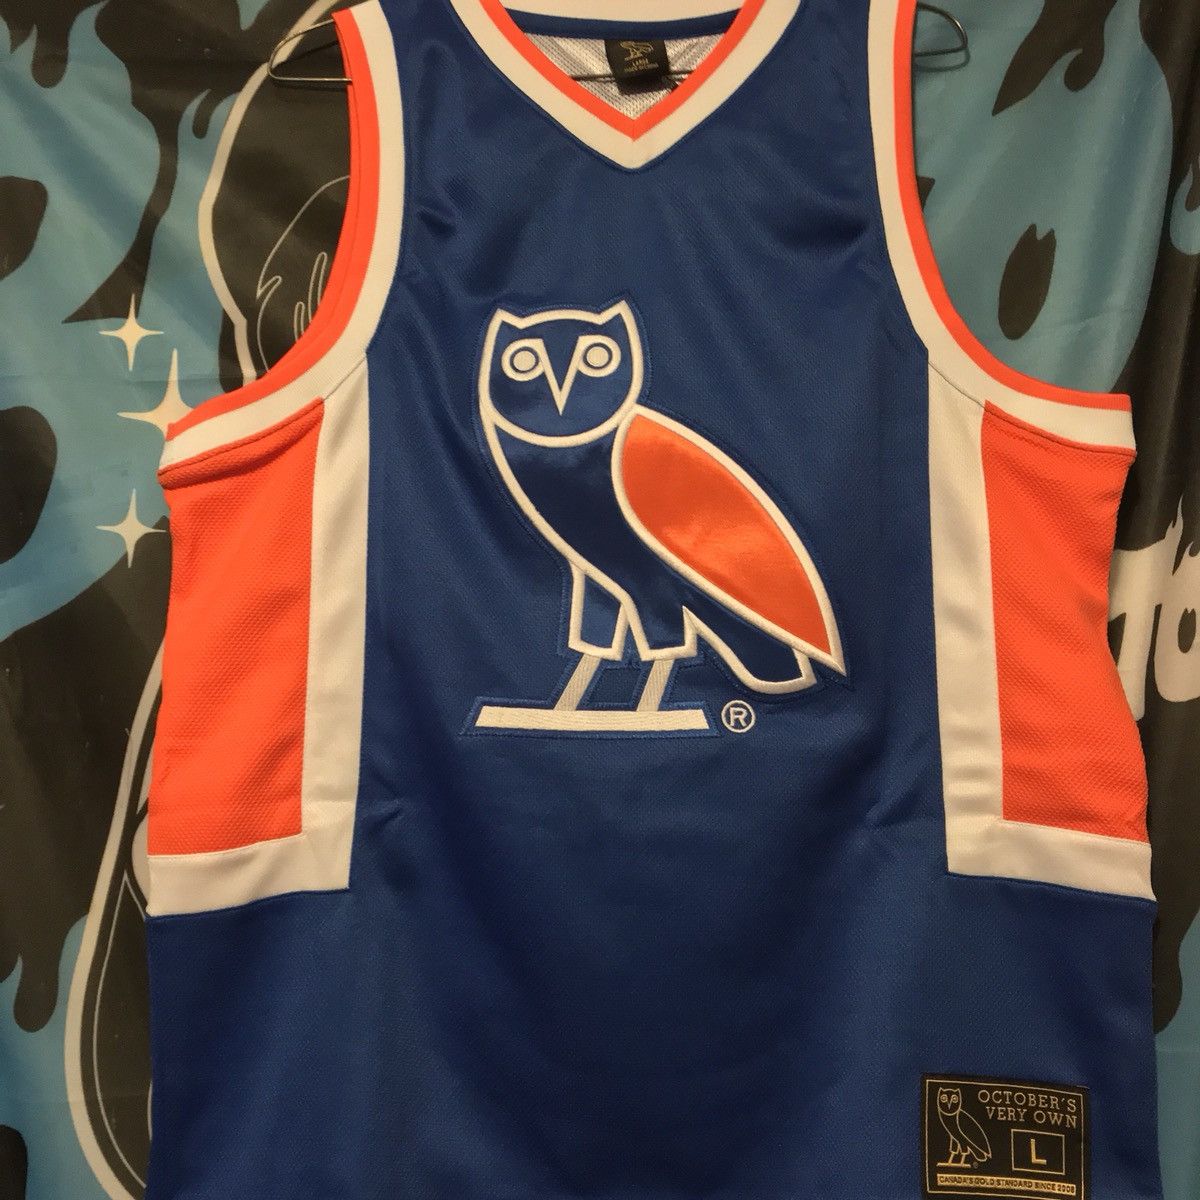 Octobers Very Own OVO Owl Basketball Jersey Size US L / EU 52-54 / 3 - 1 Preview